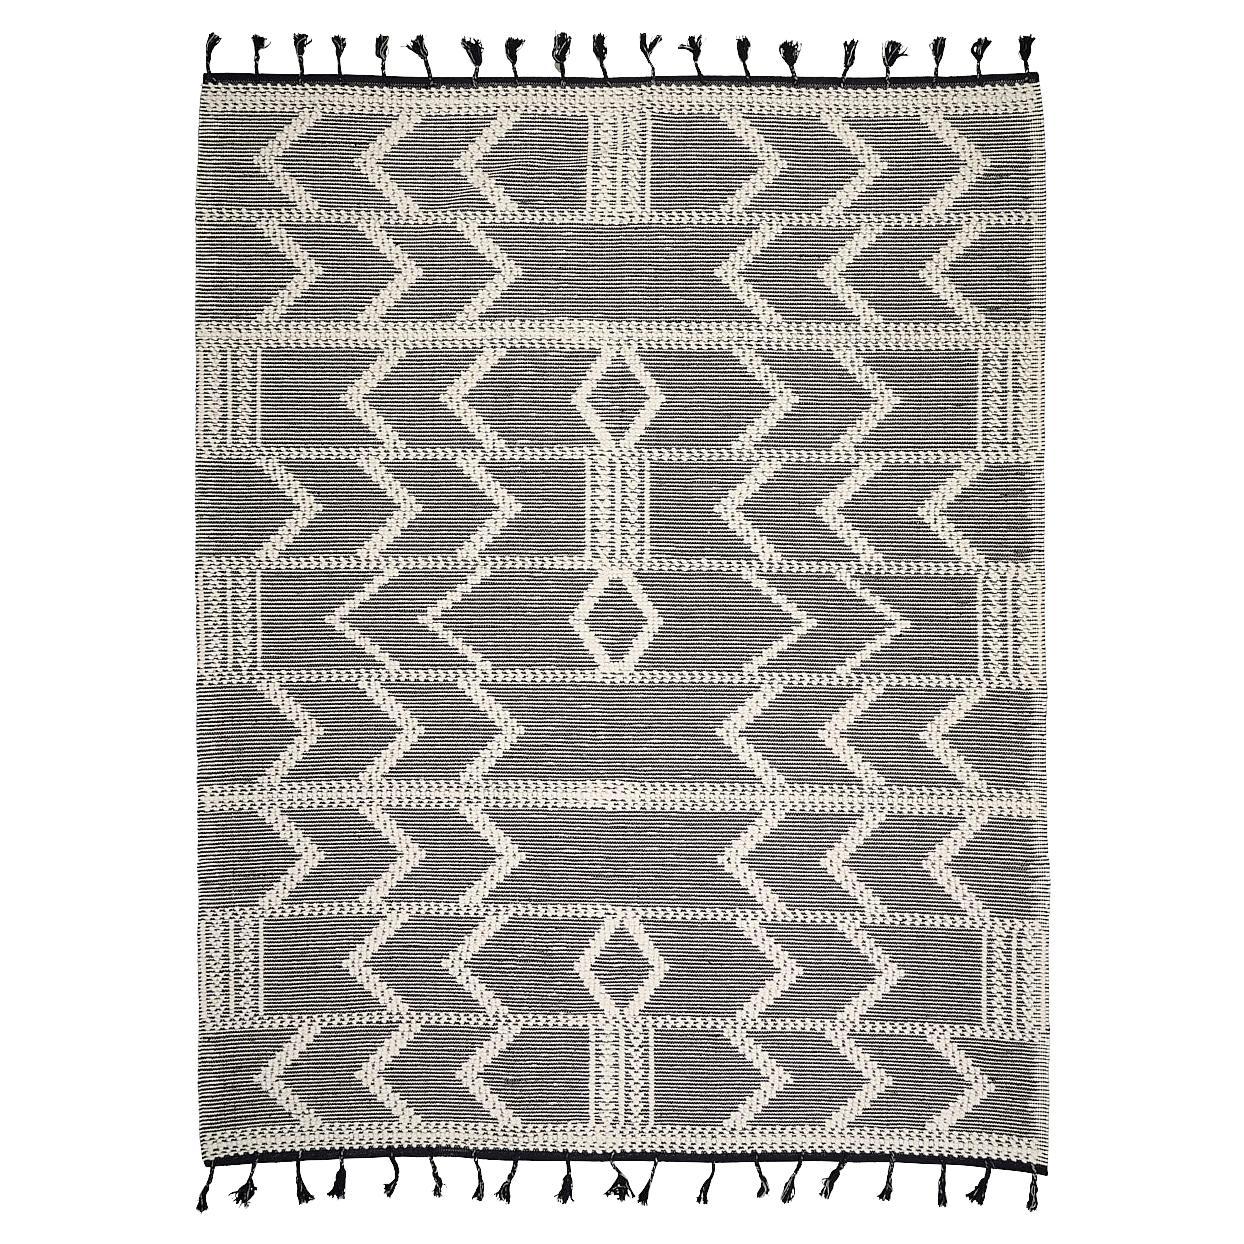 Schumacher Malta French Knot 9' x 12' Rug In Charcoal